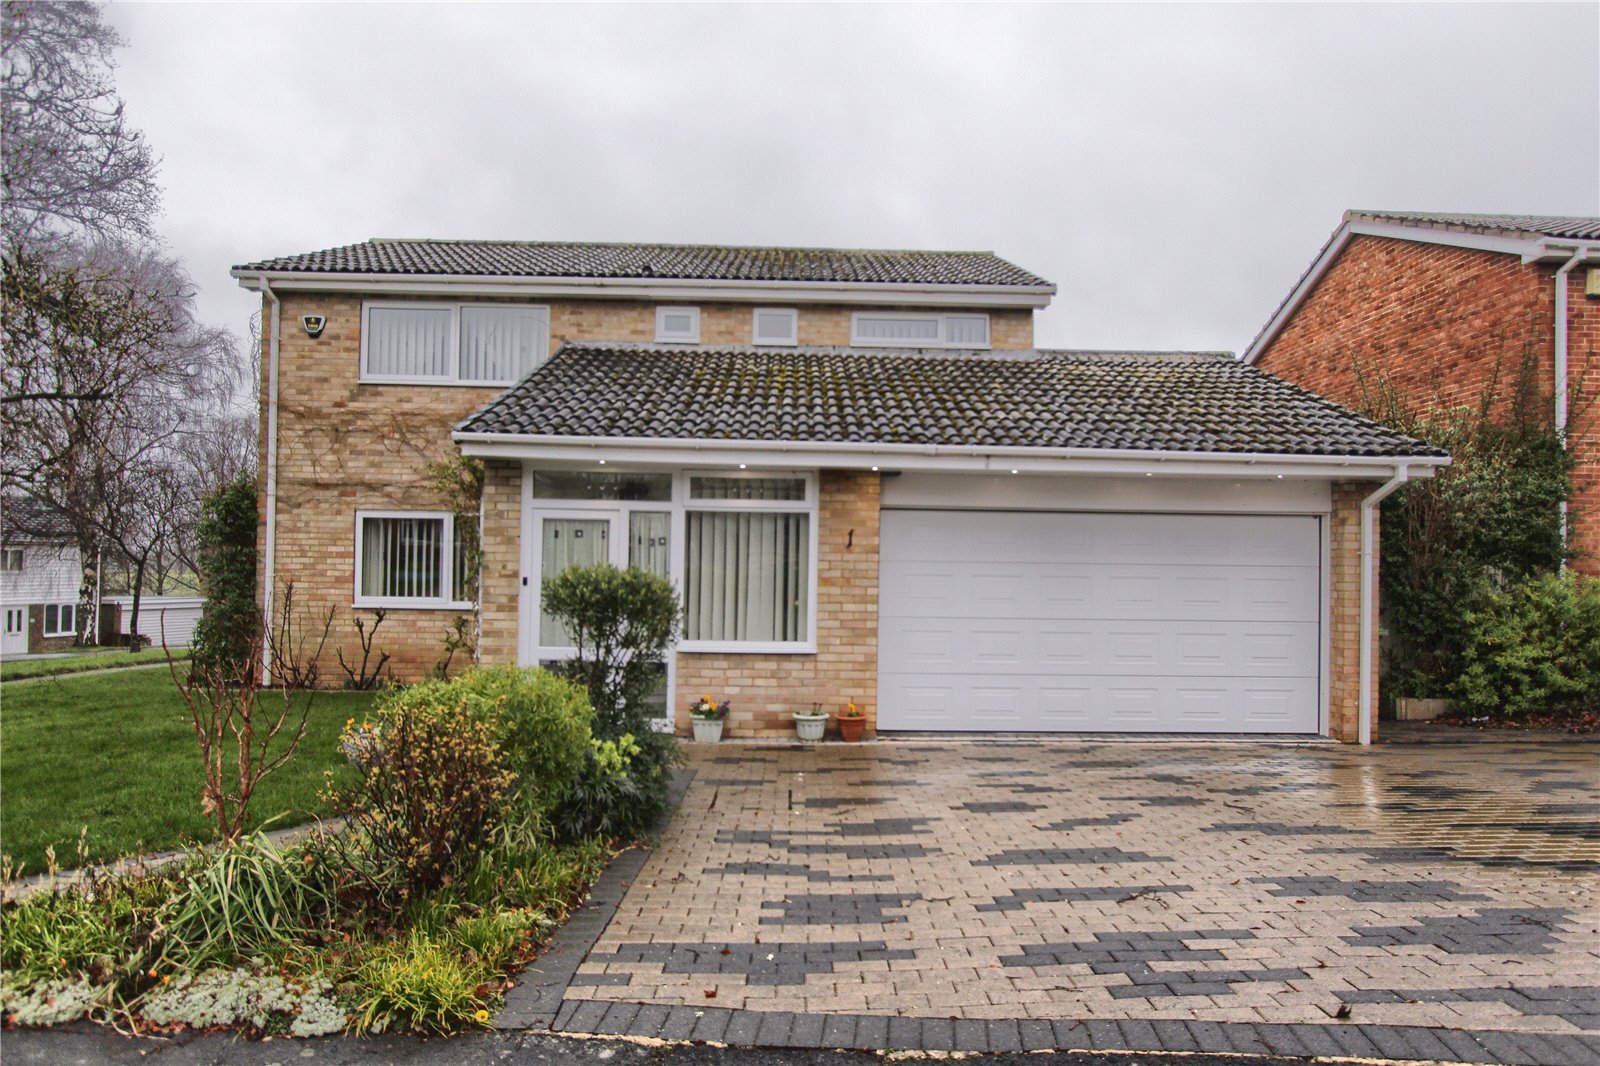 4 bed house to rent in Foxton Close, Yarm  - Property Image 1